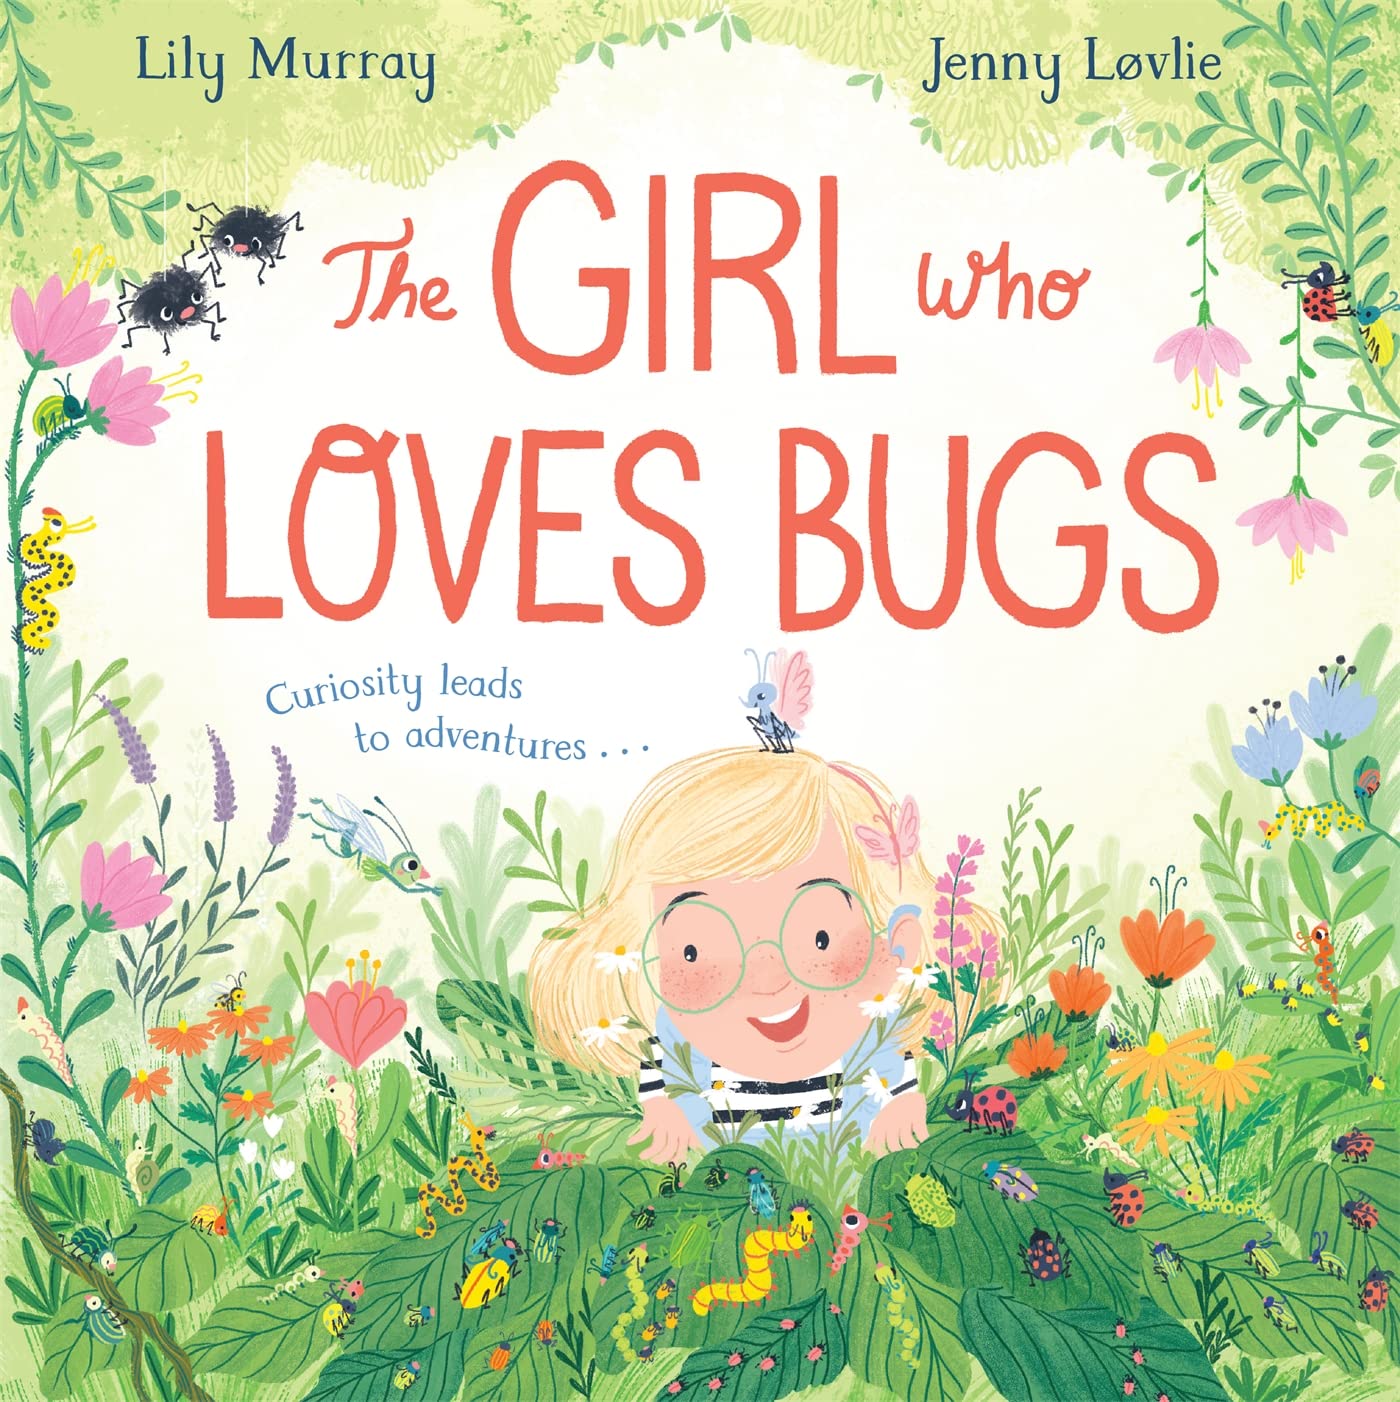 The Girl Who Loves Bugs - Lily Murray